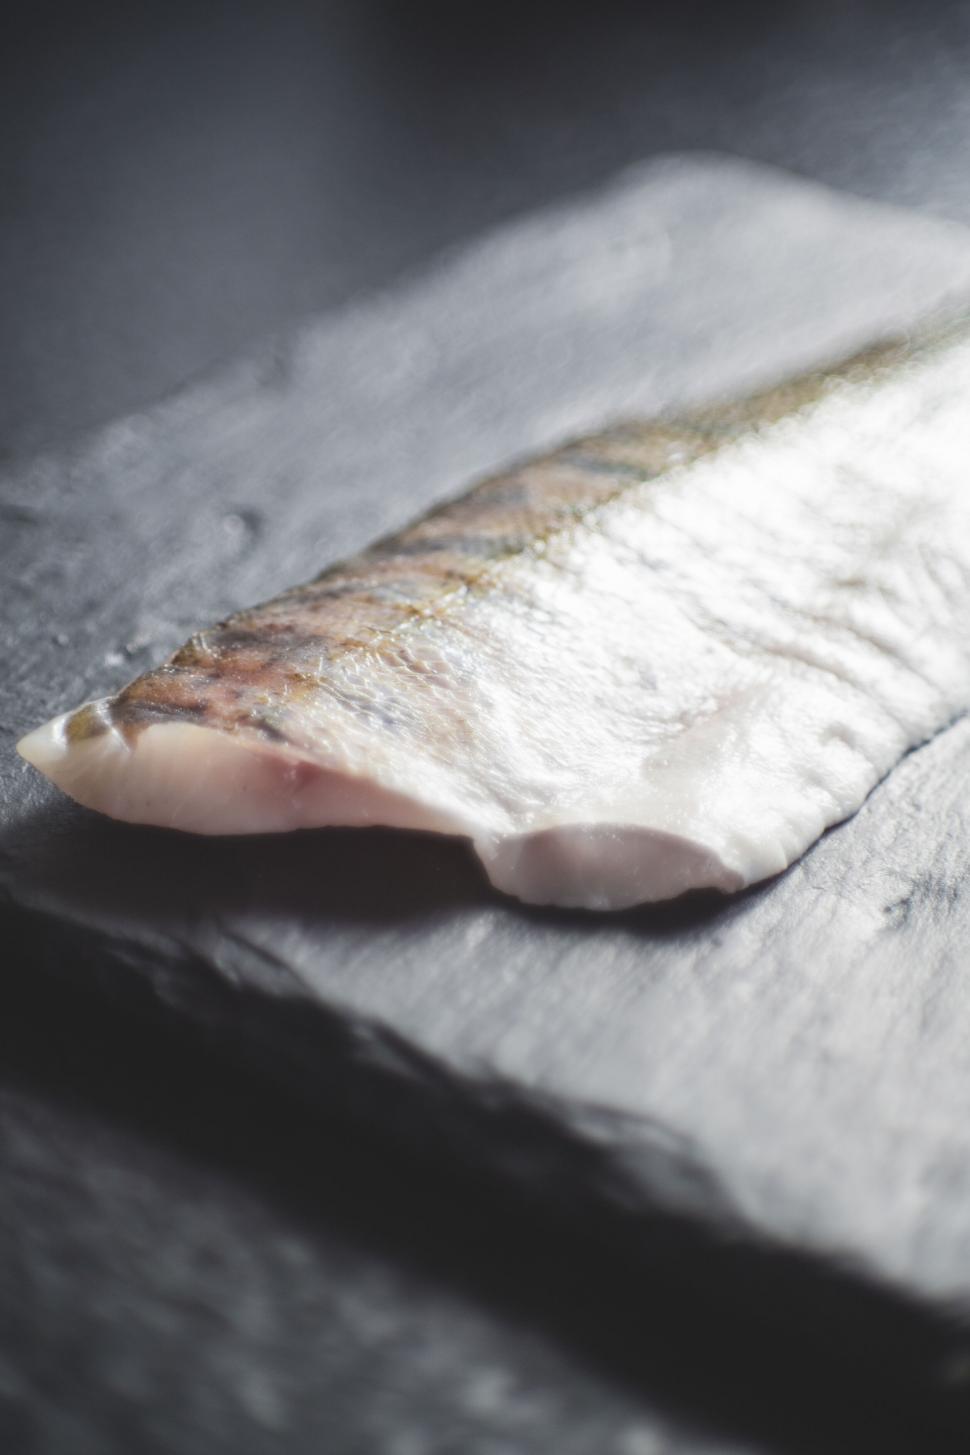 Free Image of Raw fish filet on a dark slate surface 